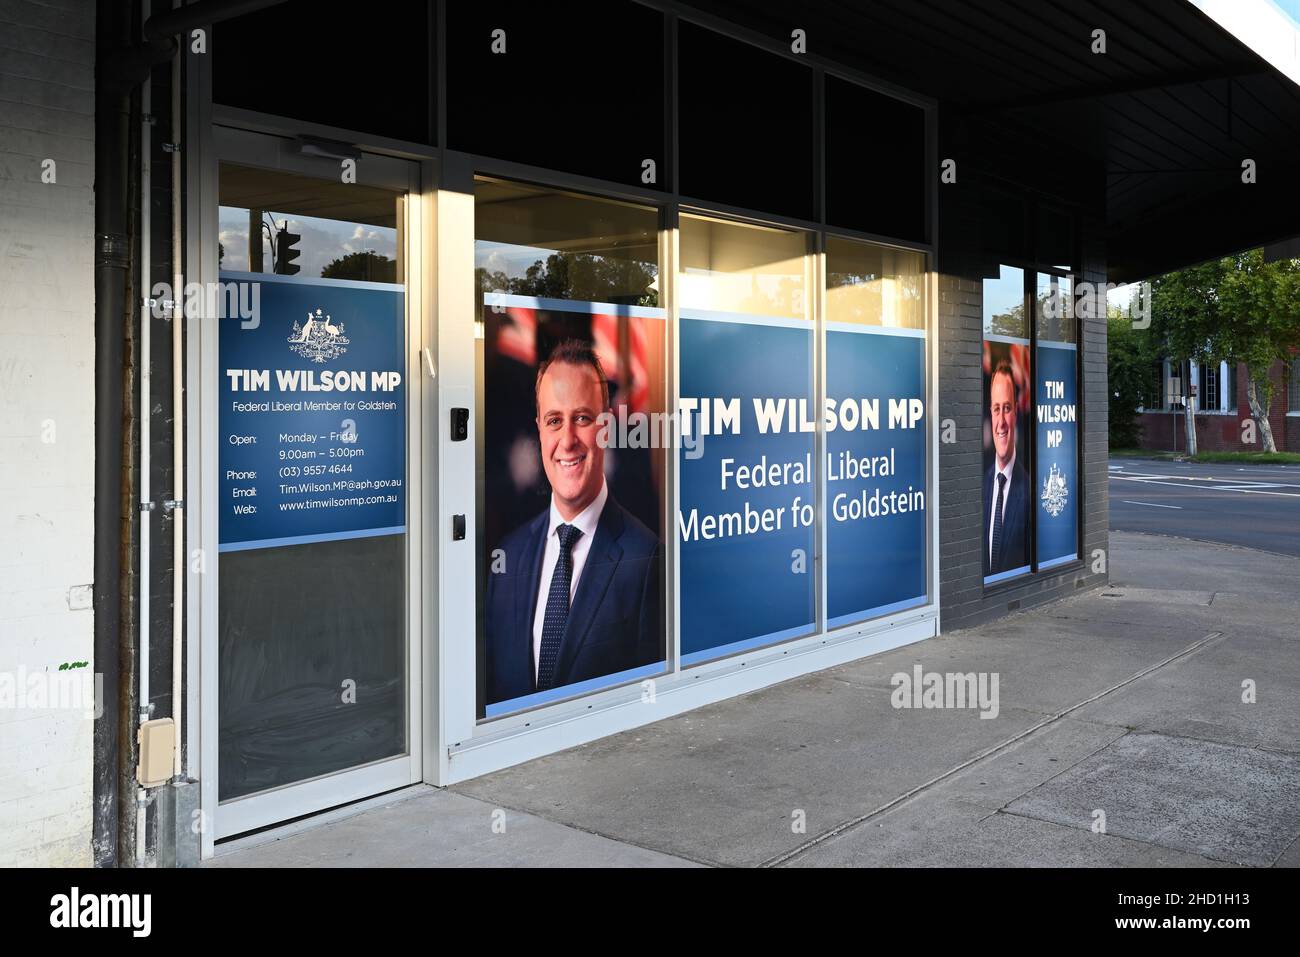 Entrance to the electorate office of Tim Wilson MP, member for Goldstein, with headshots prominently displayed on the windows Stock Photo